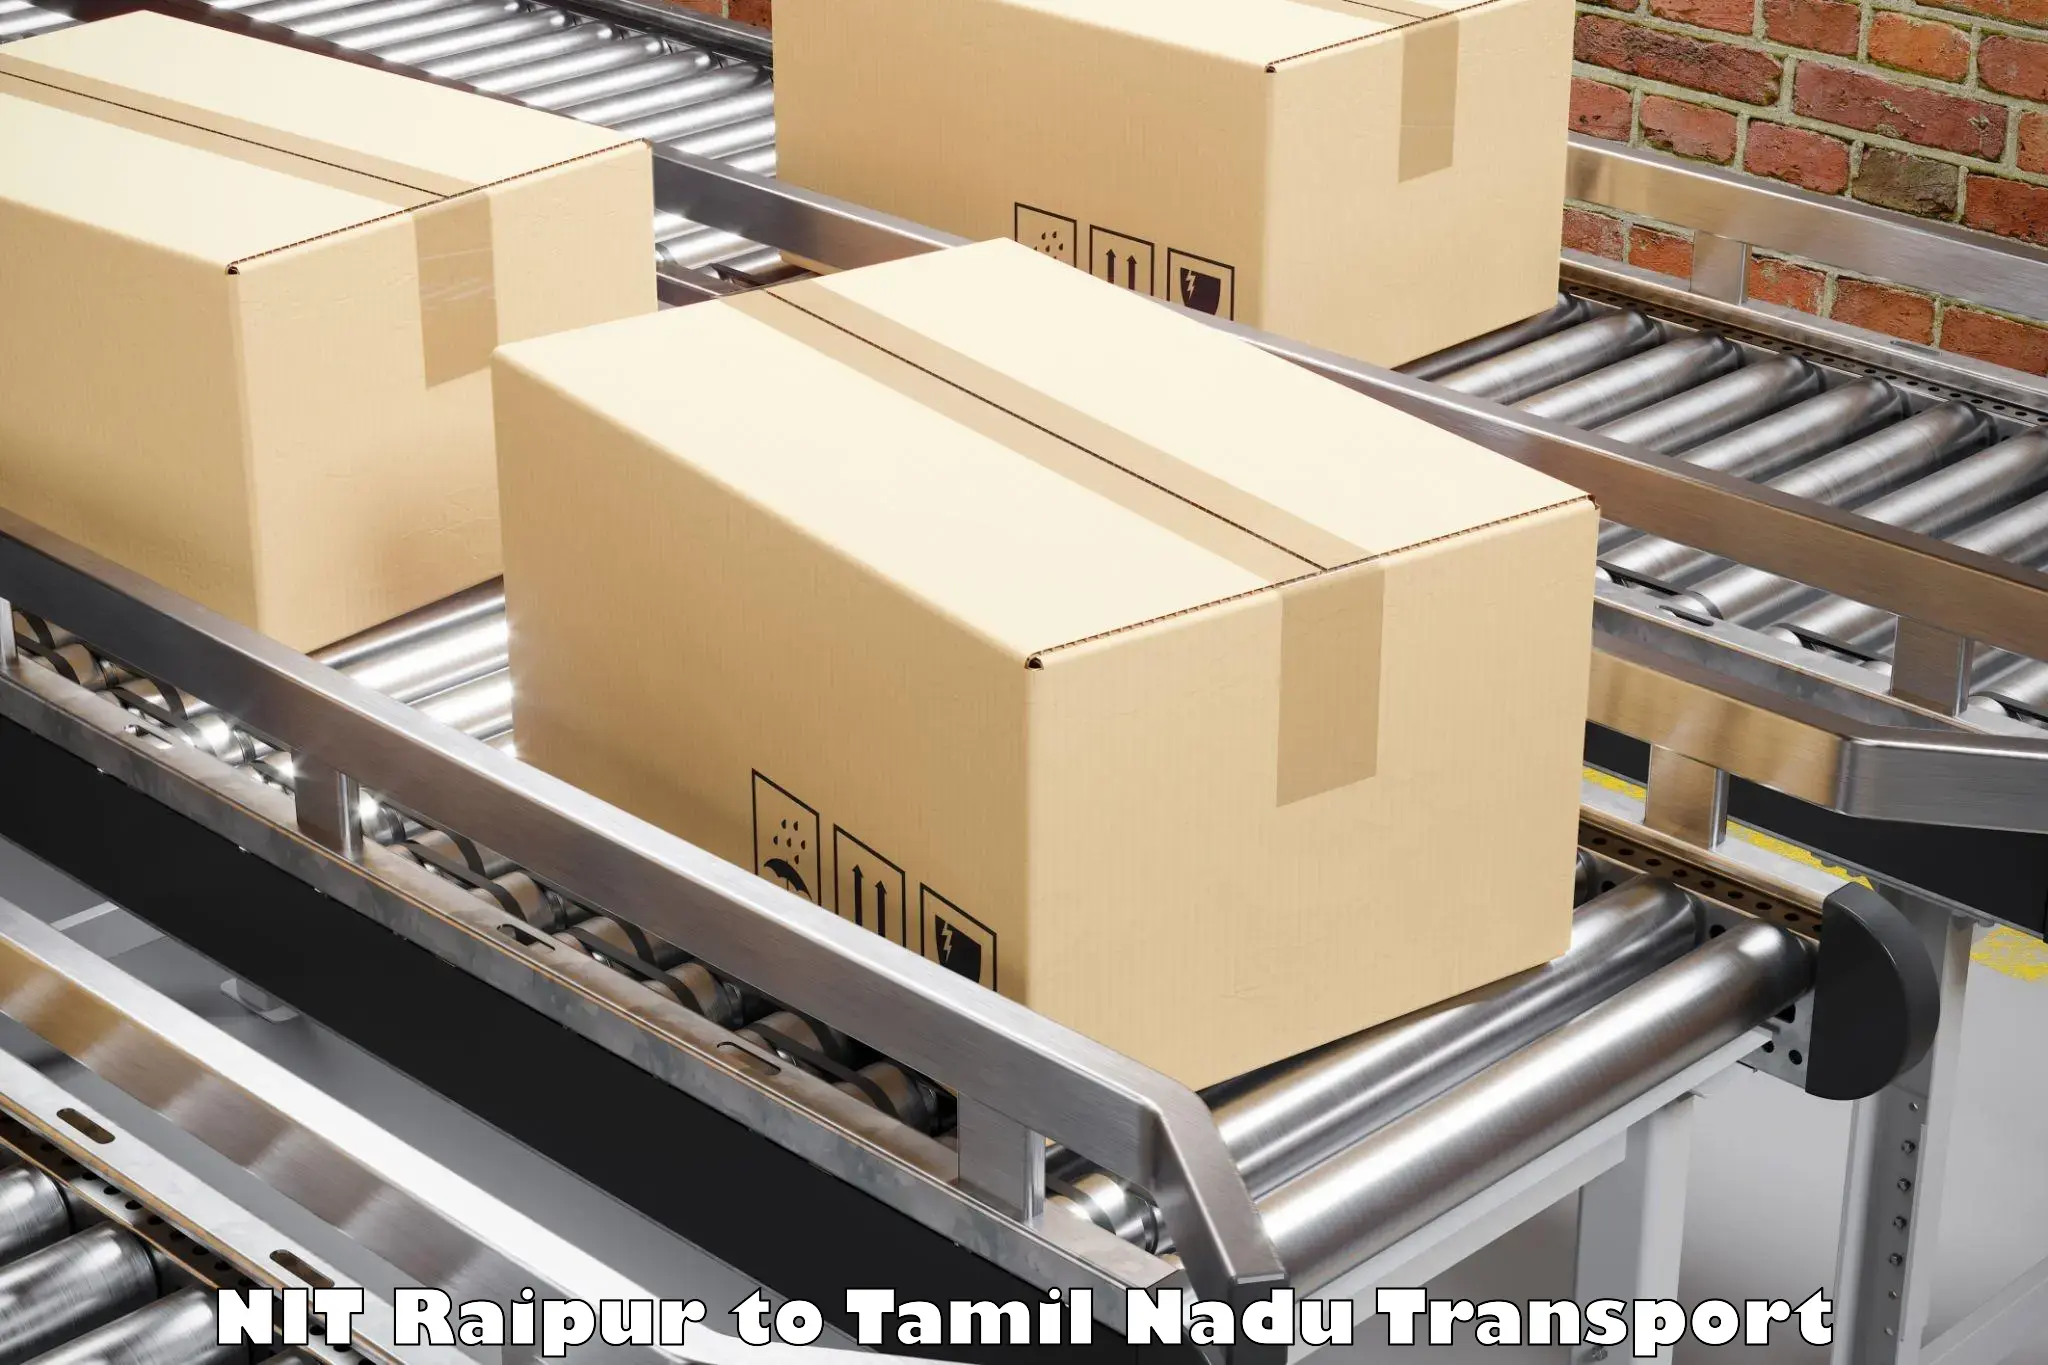 Parcel transport services NIT Raipur to Gobichettipalayam